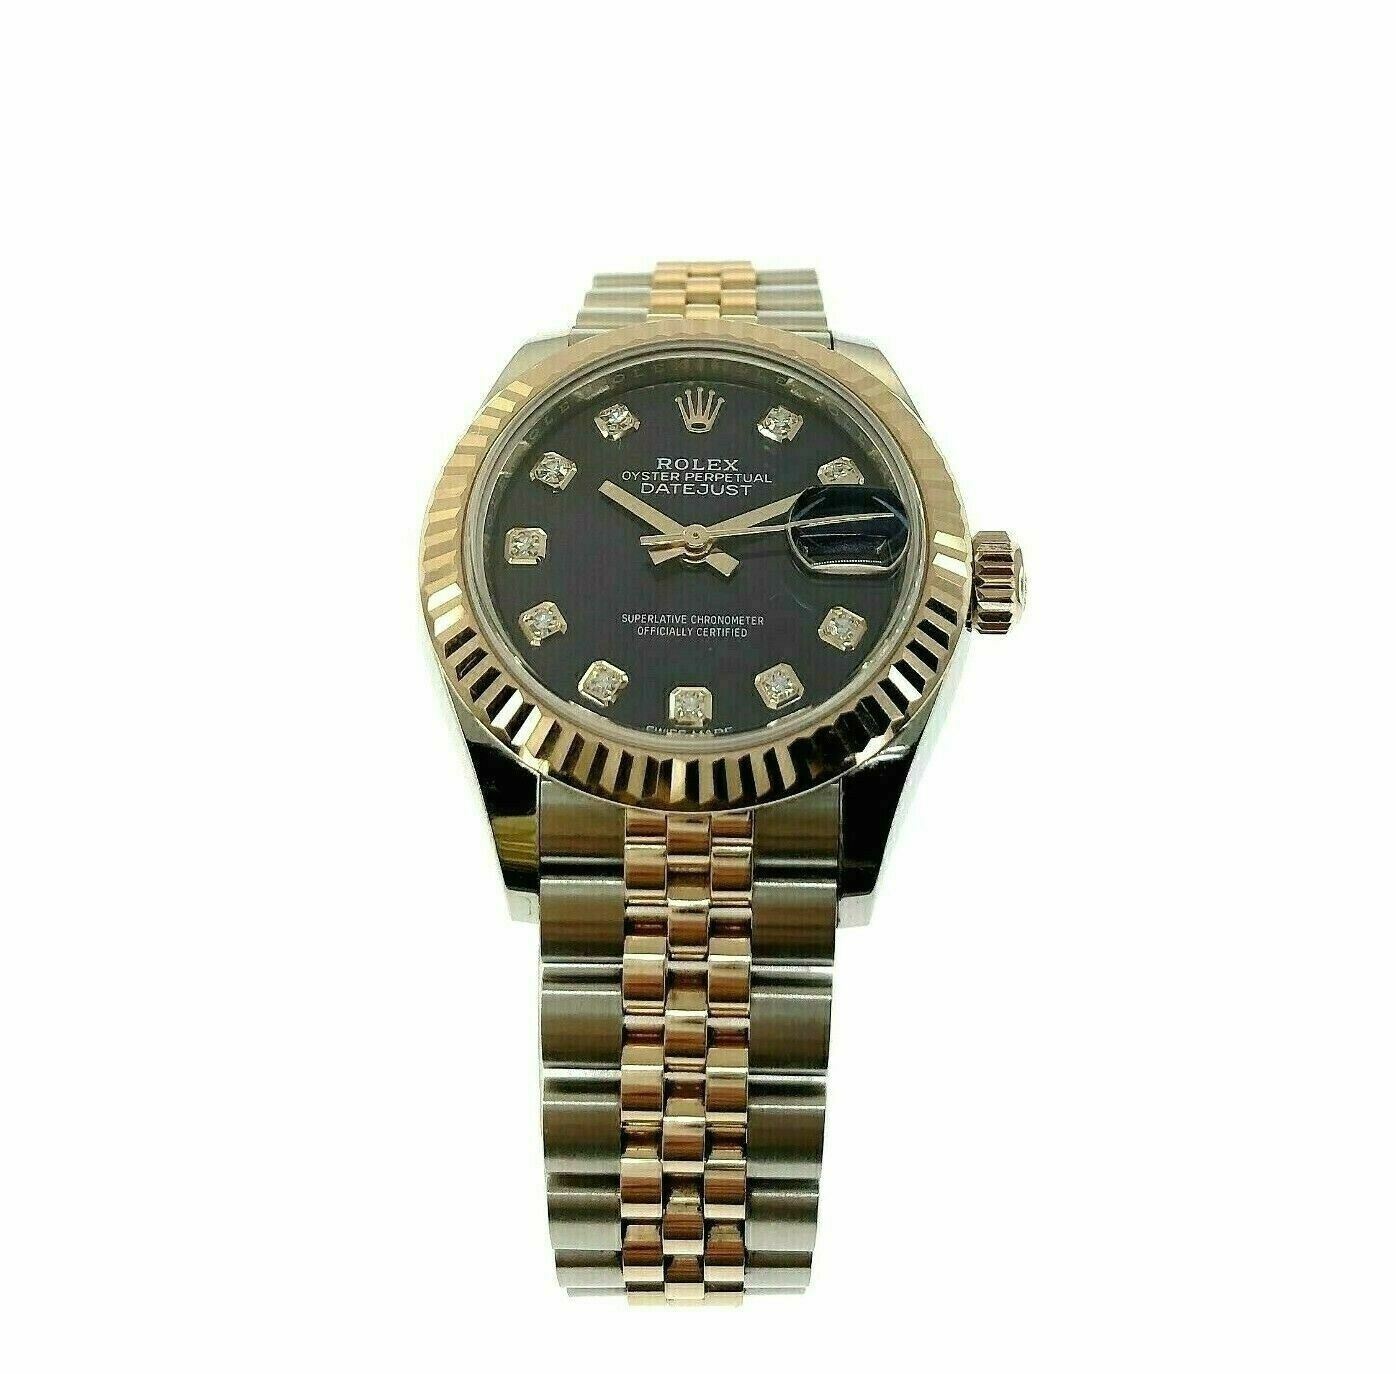 Rolex 28MM Lady Datejust 18K Rose Gold Steel Watch Ref # 279171 Factory Dial